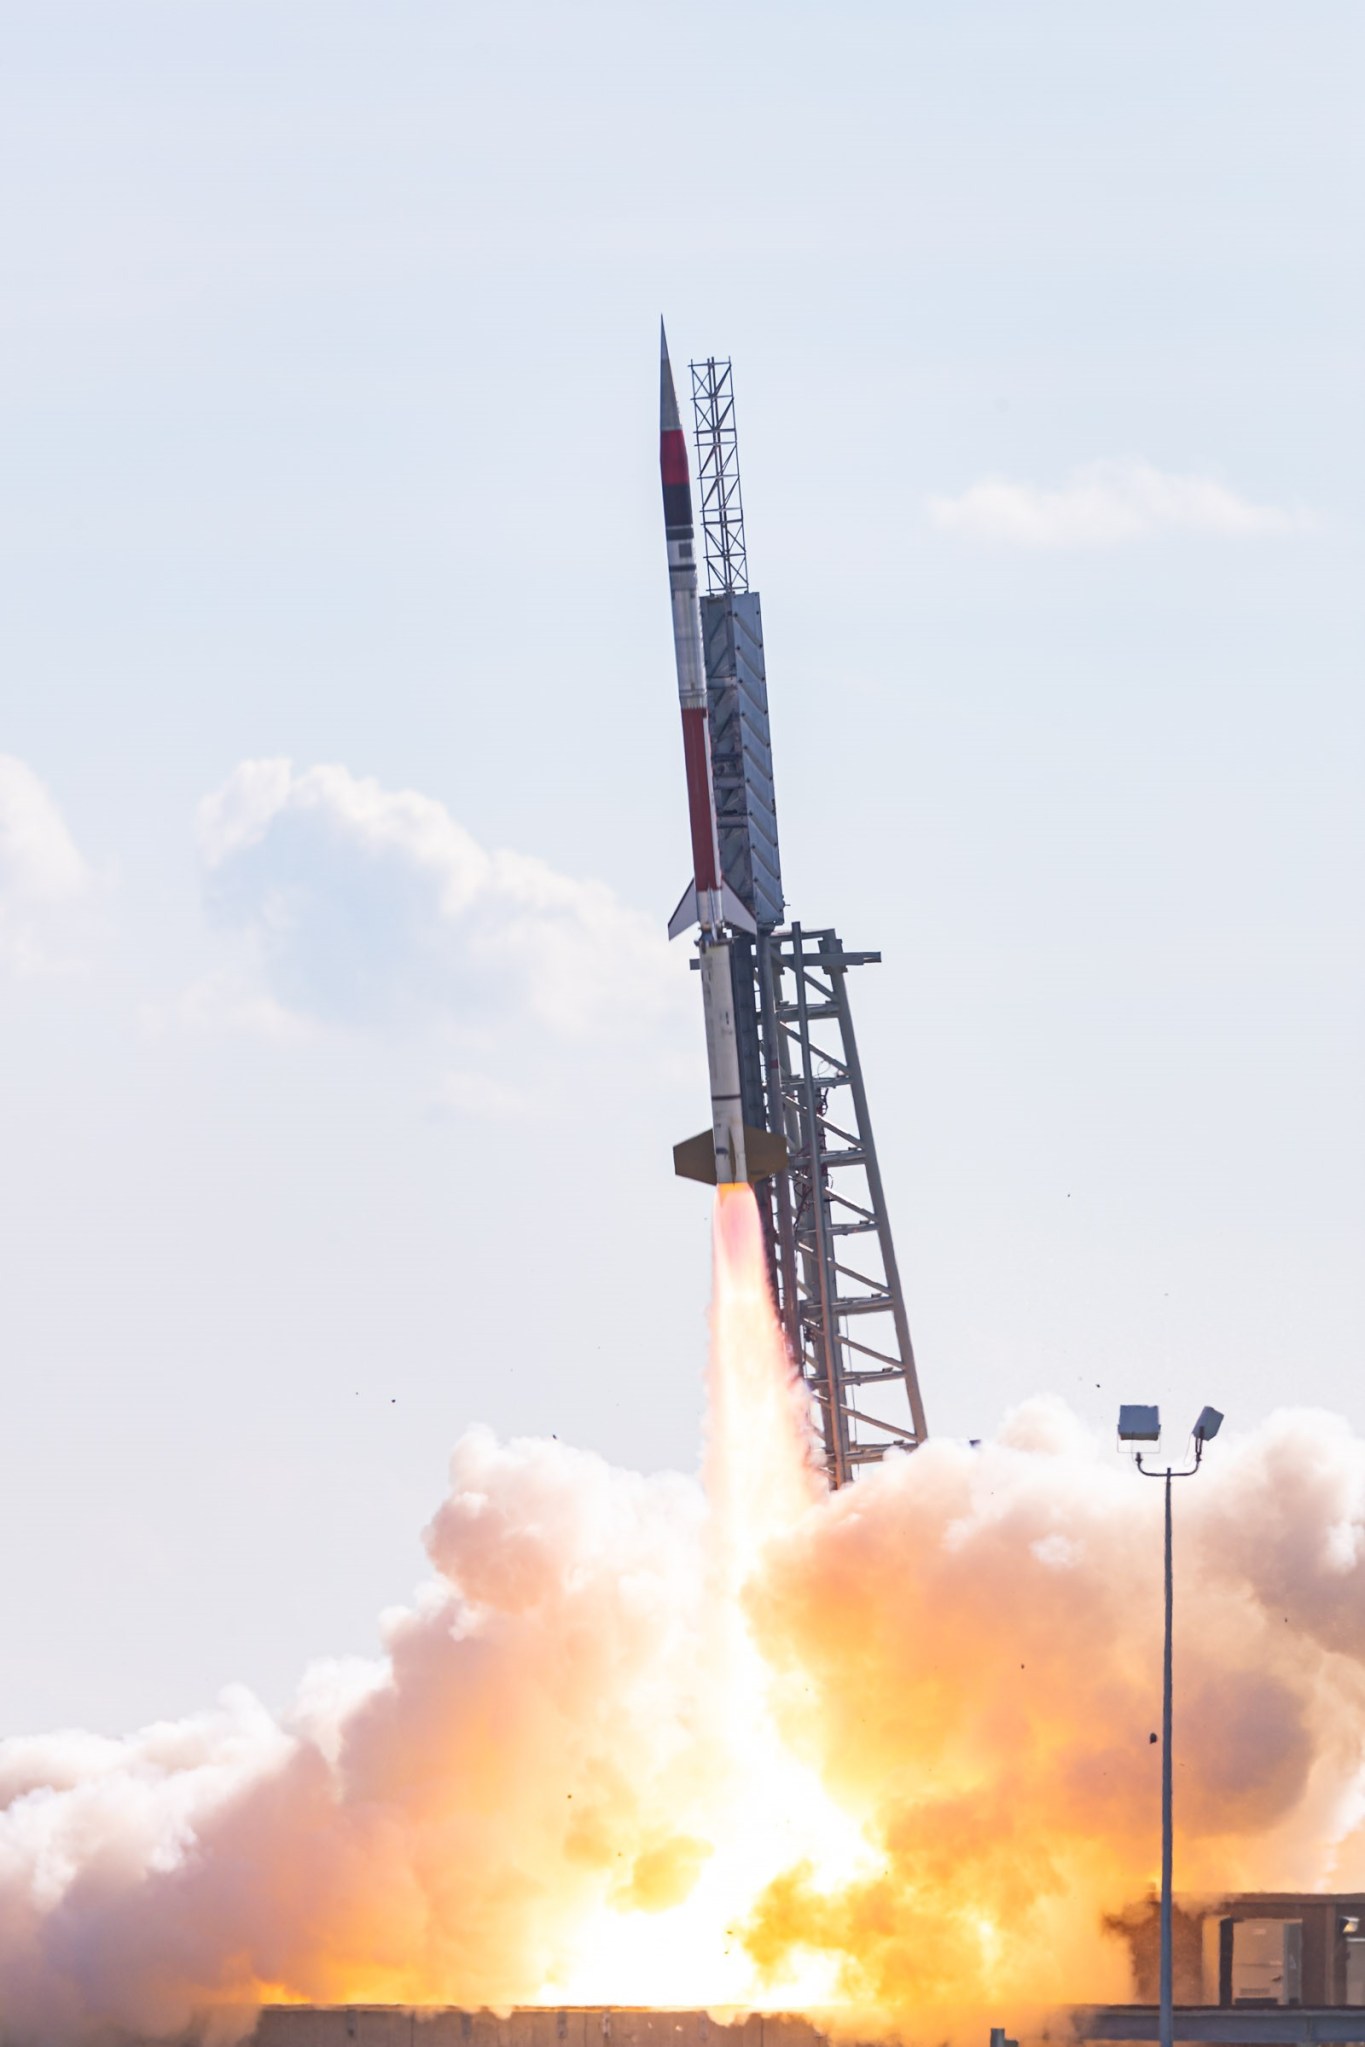 The 2021 RockSat-X mission leaves the launch pad in August 2021.